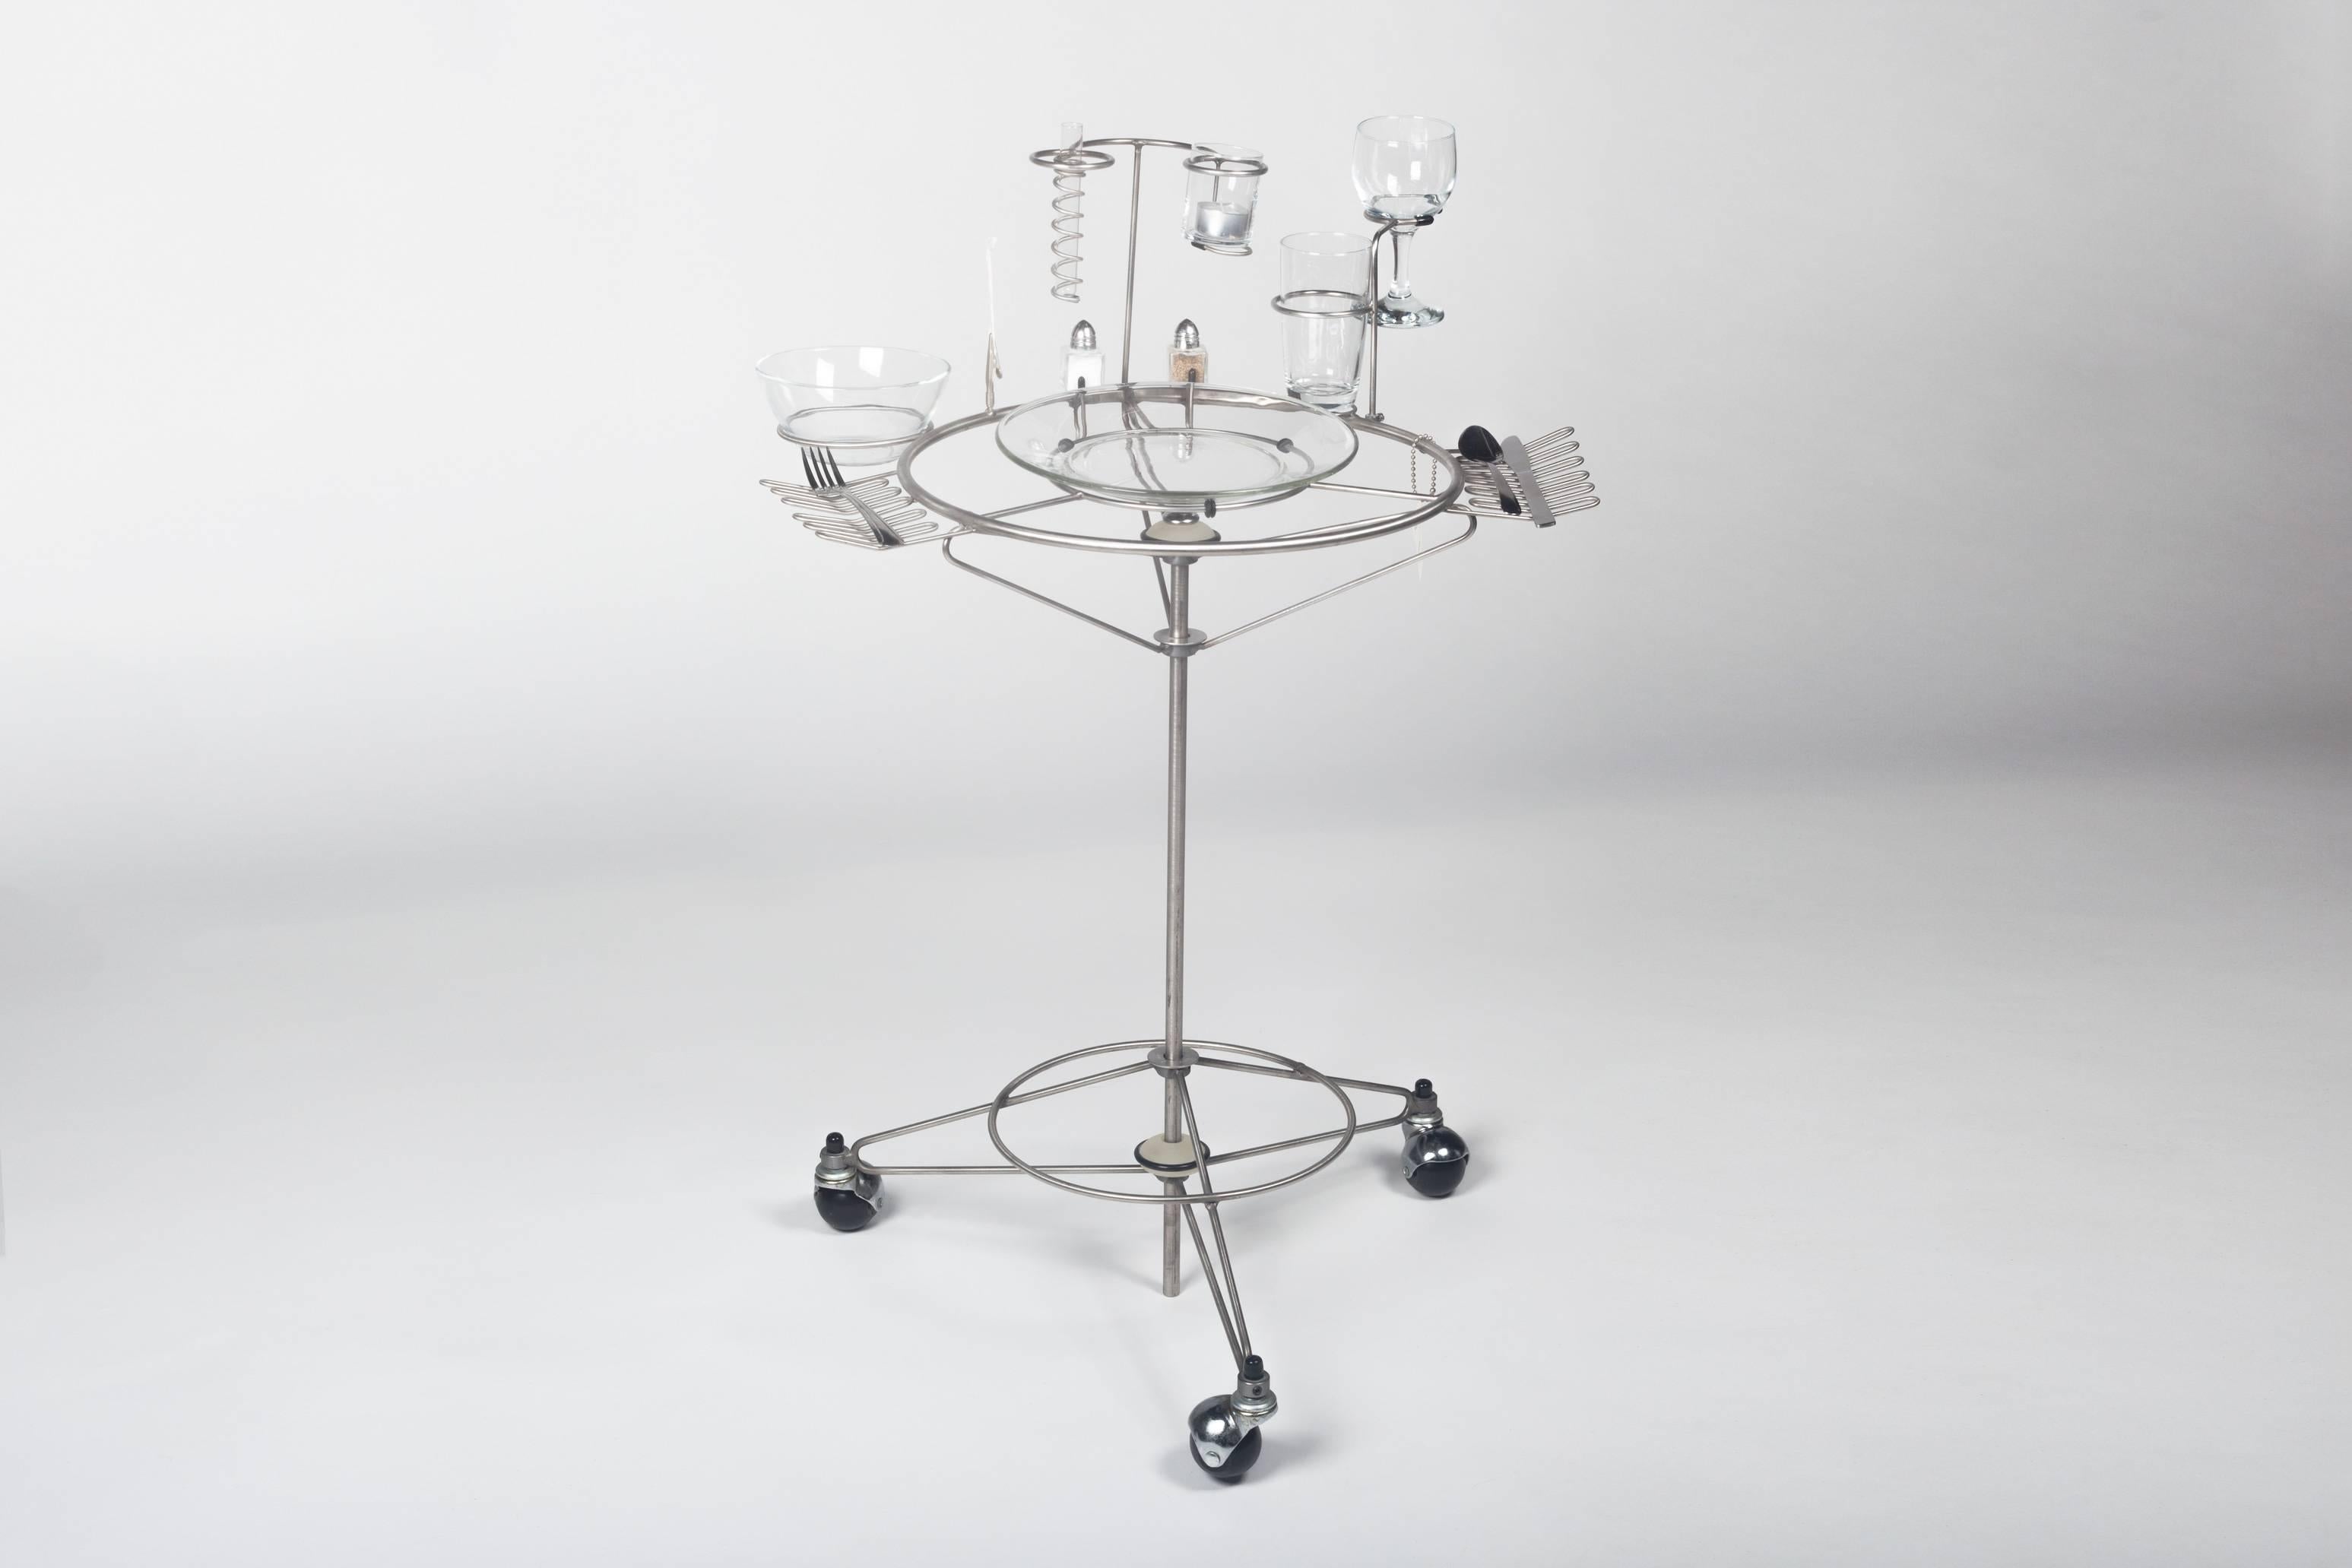 Virtual Diner dining cart by Joey Manic, 1990s. Metal wire structure on rolling casters. Original water and wine glass, flower vase, candle holder, bowl, plate, salt & pepper shakers, toothpick and flatware. Made in Northeastern United States and